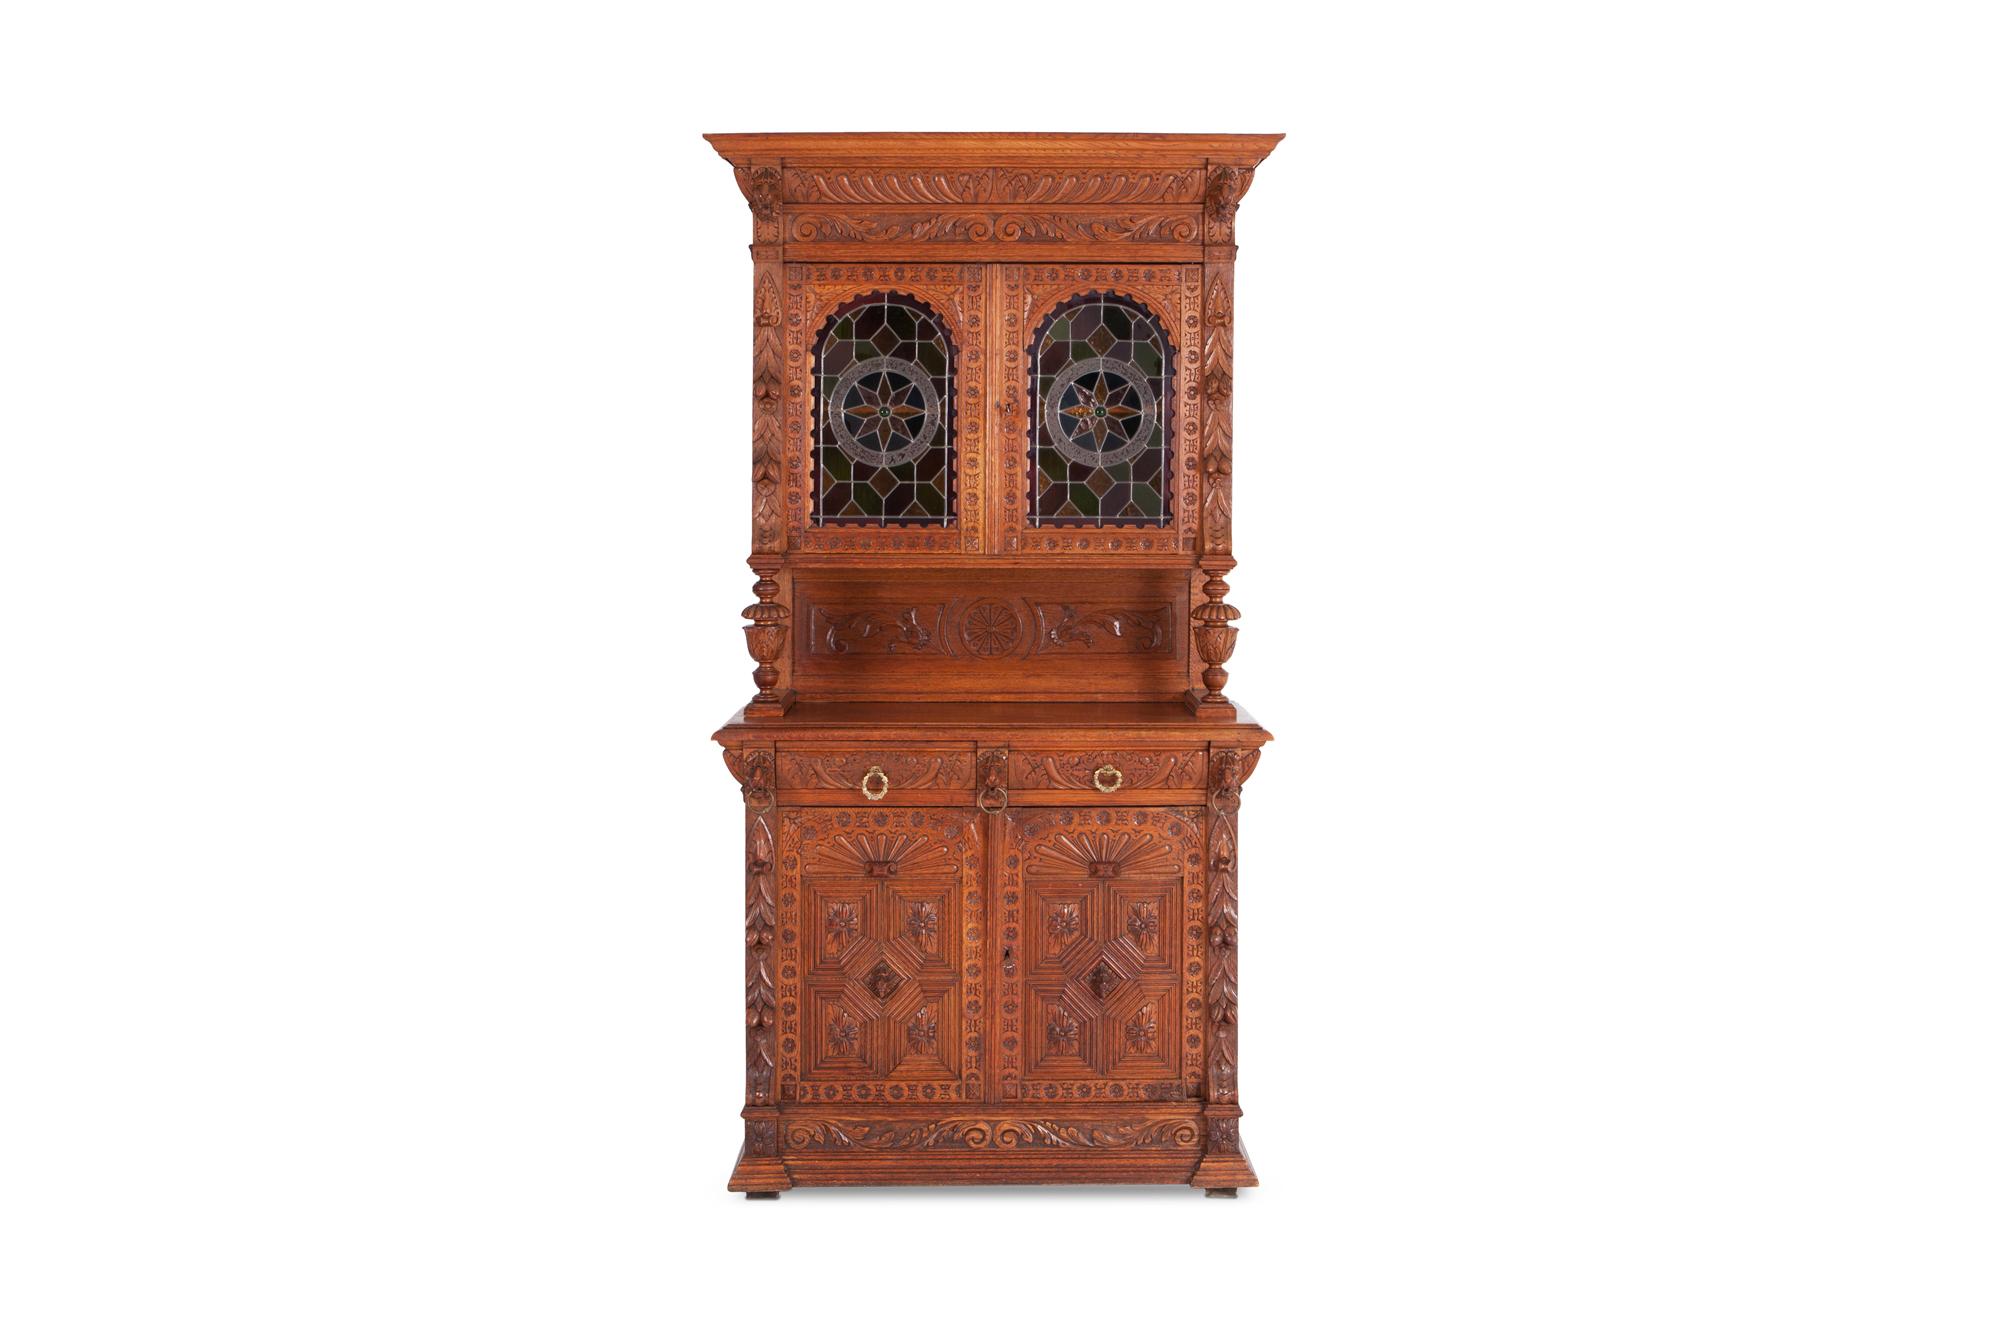 Henri II style bibliotheque, or bookcase, made of solid oak with extraordinary fine carved details and columns. 

Drawers with original brass pulls. The top has glass paned doors with colored glass. 

Hand-carved in Mechelen for an Antwerp